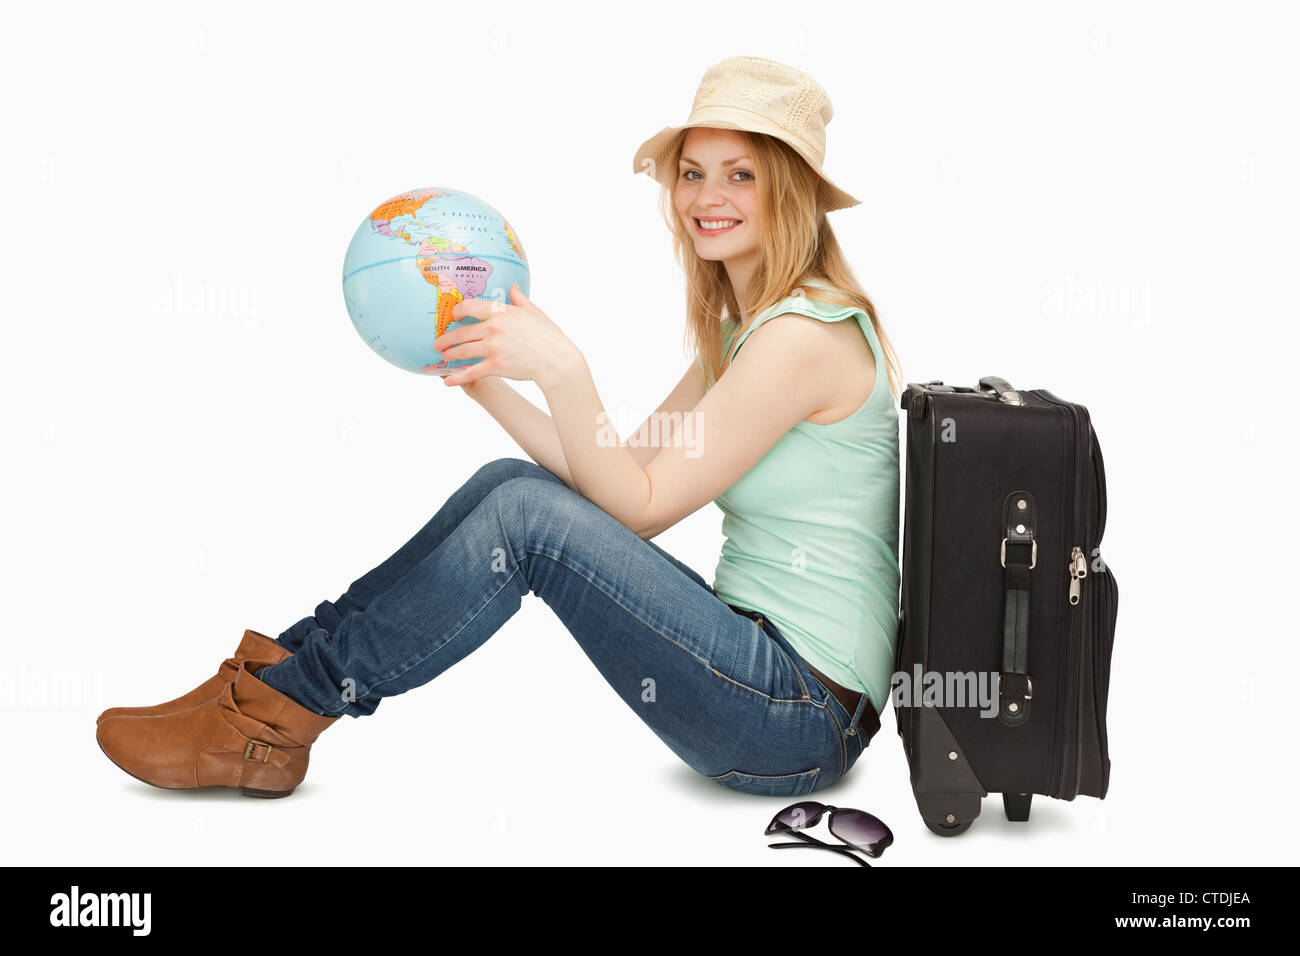 Woman smiling while holding a world globe Stock Photo